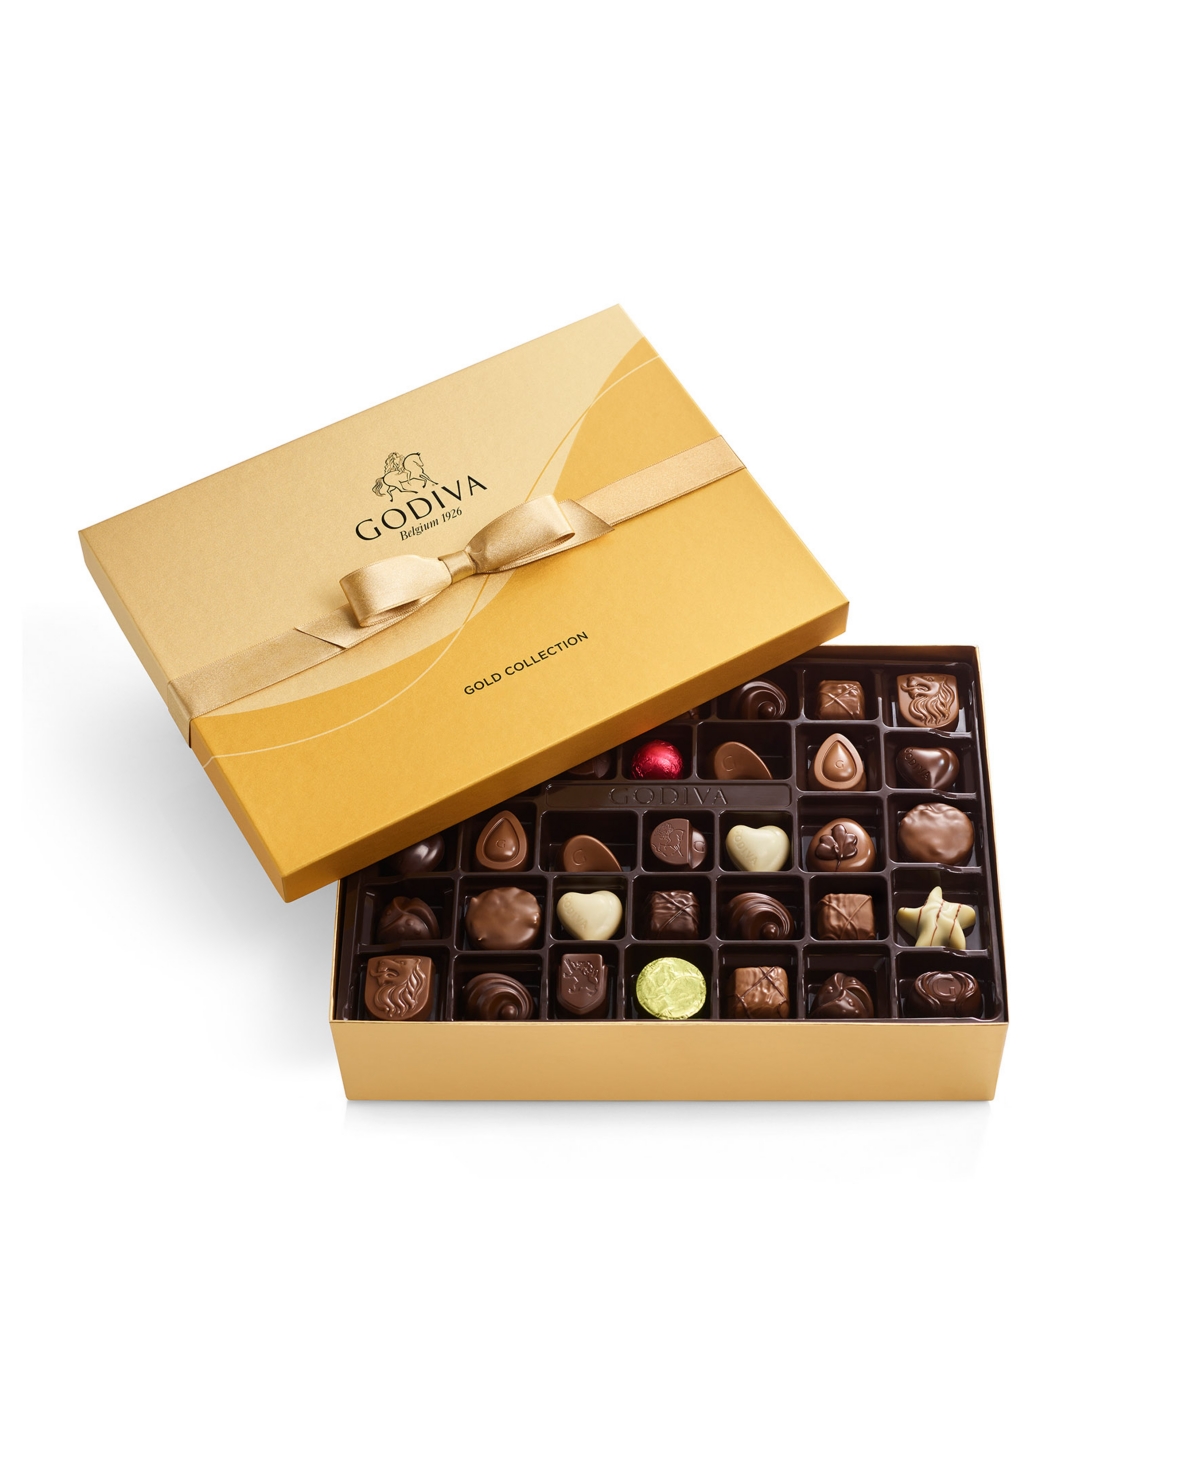 Godiva Chocolatier Assorted Chocolate Gold-tone Gift Box, 72 Piece In No Color